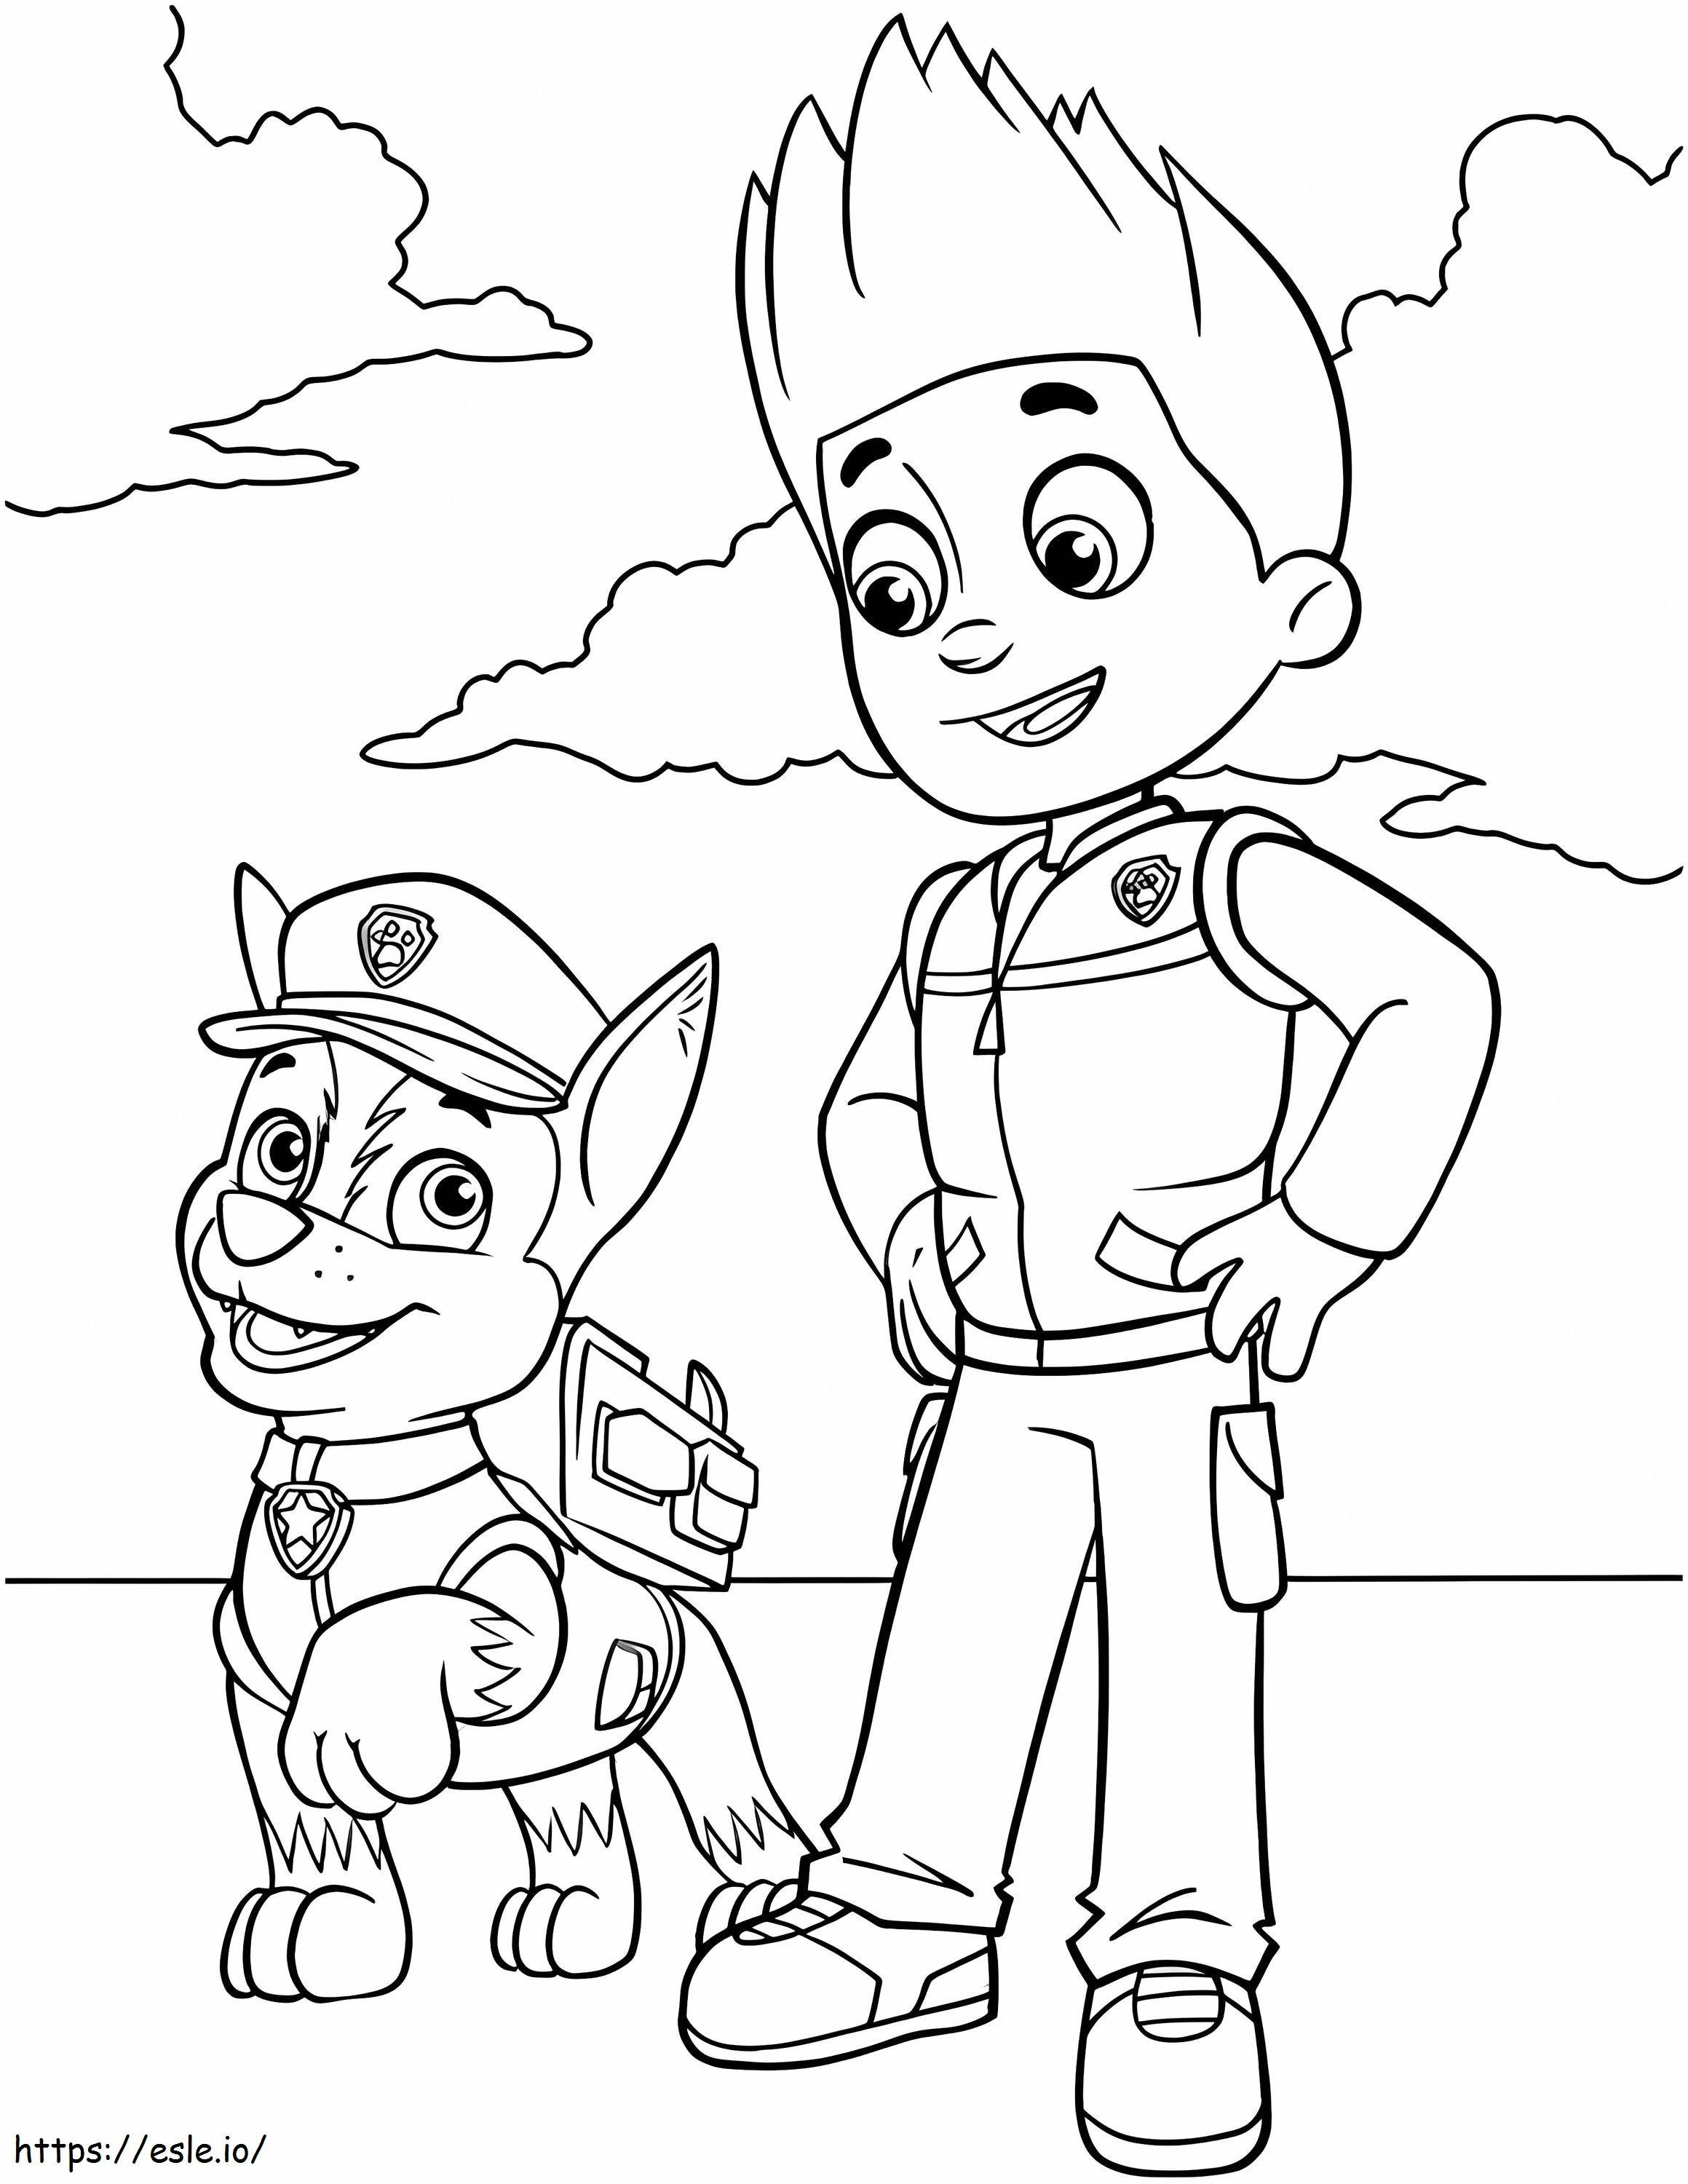 Chase And Ryder coloring page